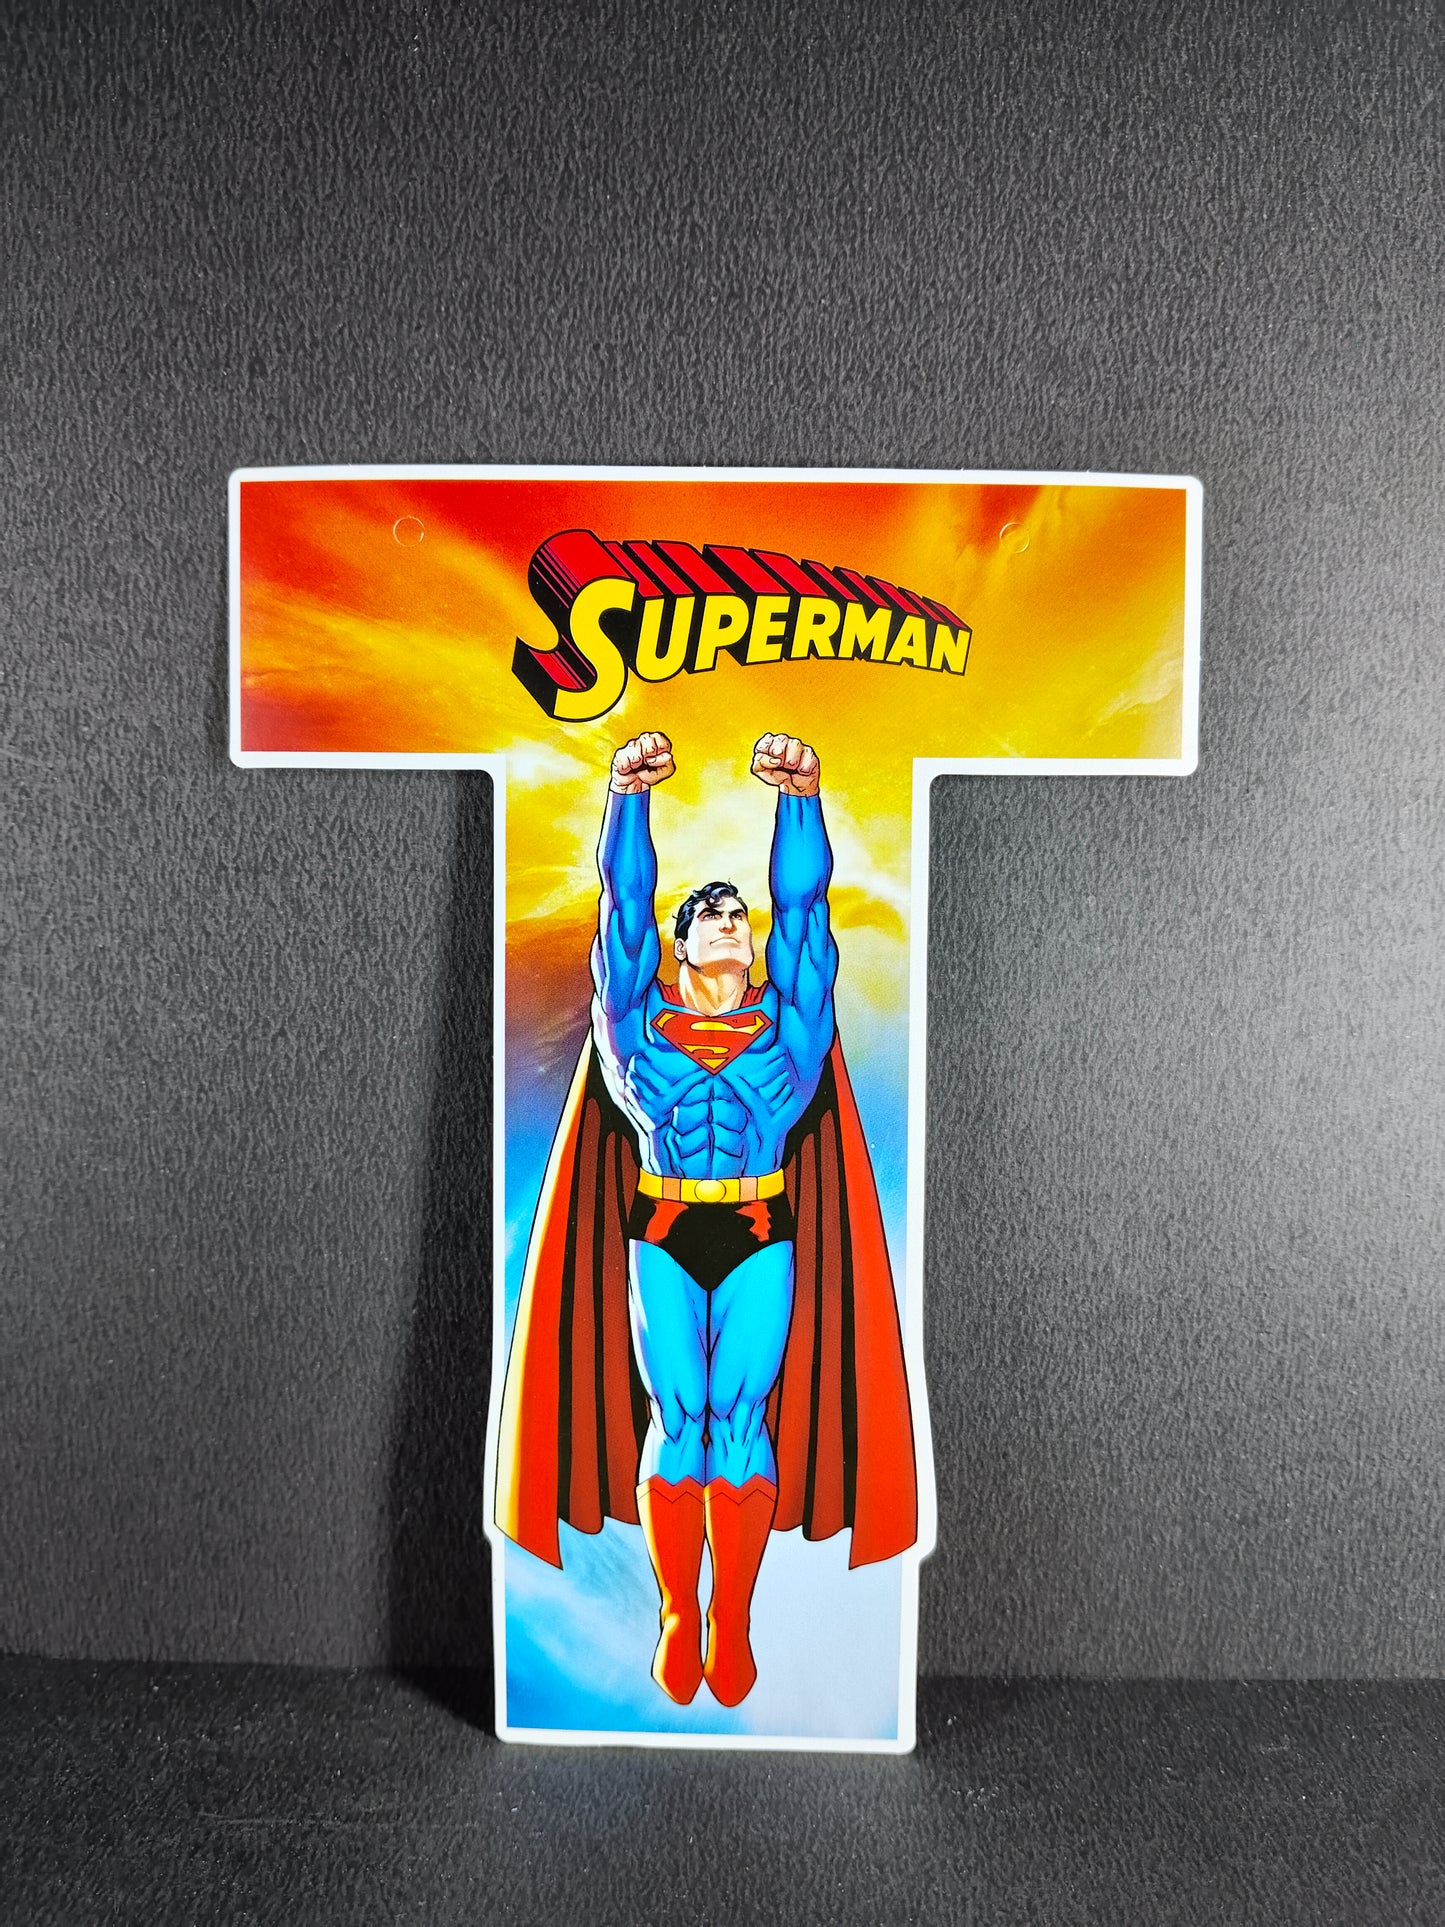 Birthday Banner - Superman Theme for Simple birthday decorations at Home